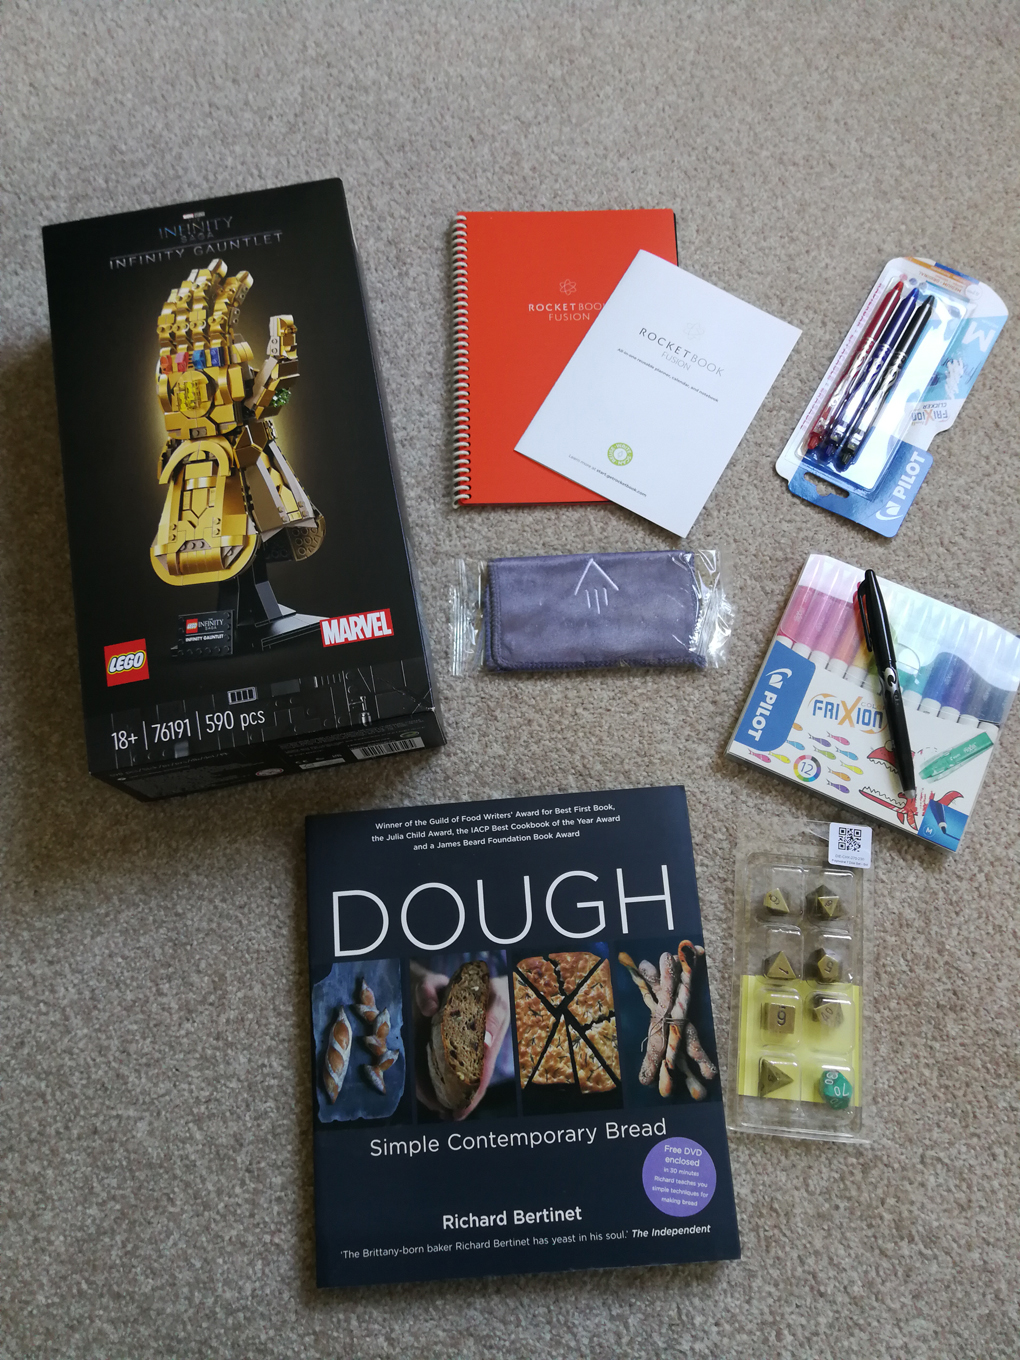 Collection of presents - LEGO Infinity Gauntlet, Baking book, Brass dice, wipe-clean notepad and pens